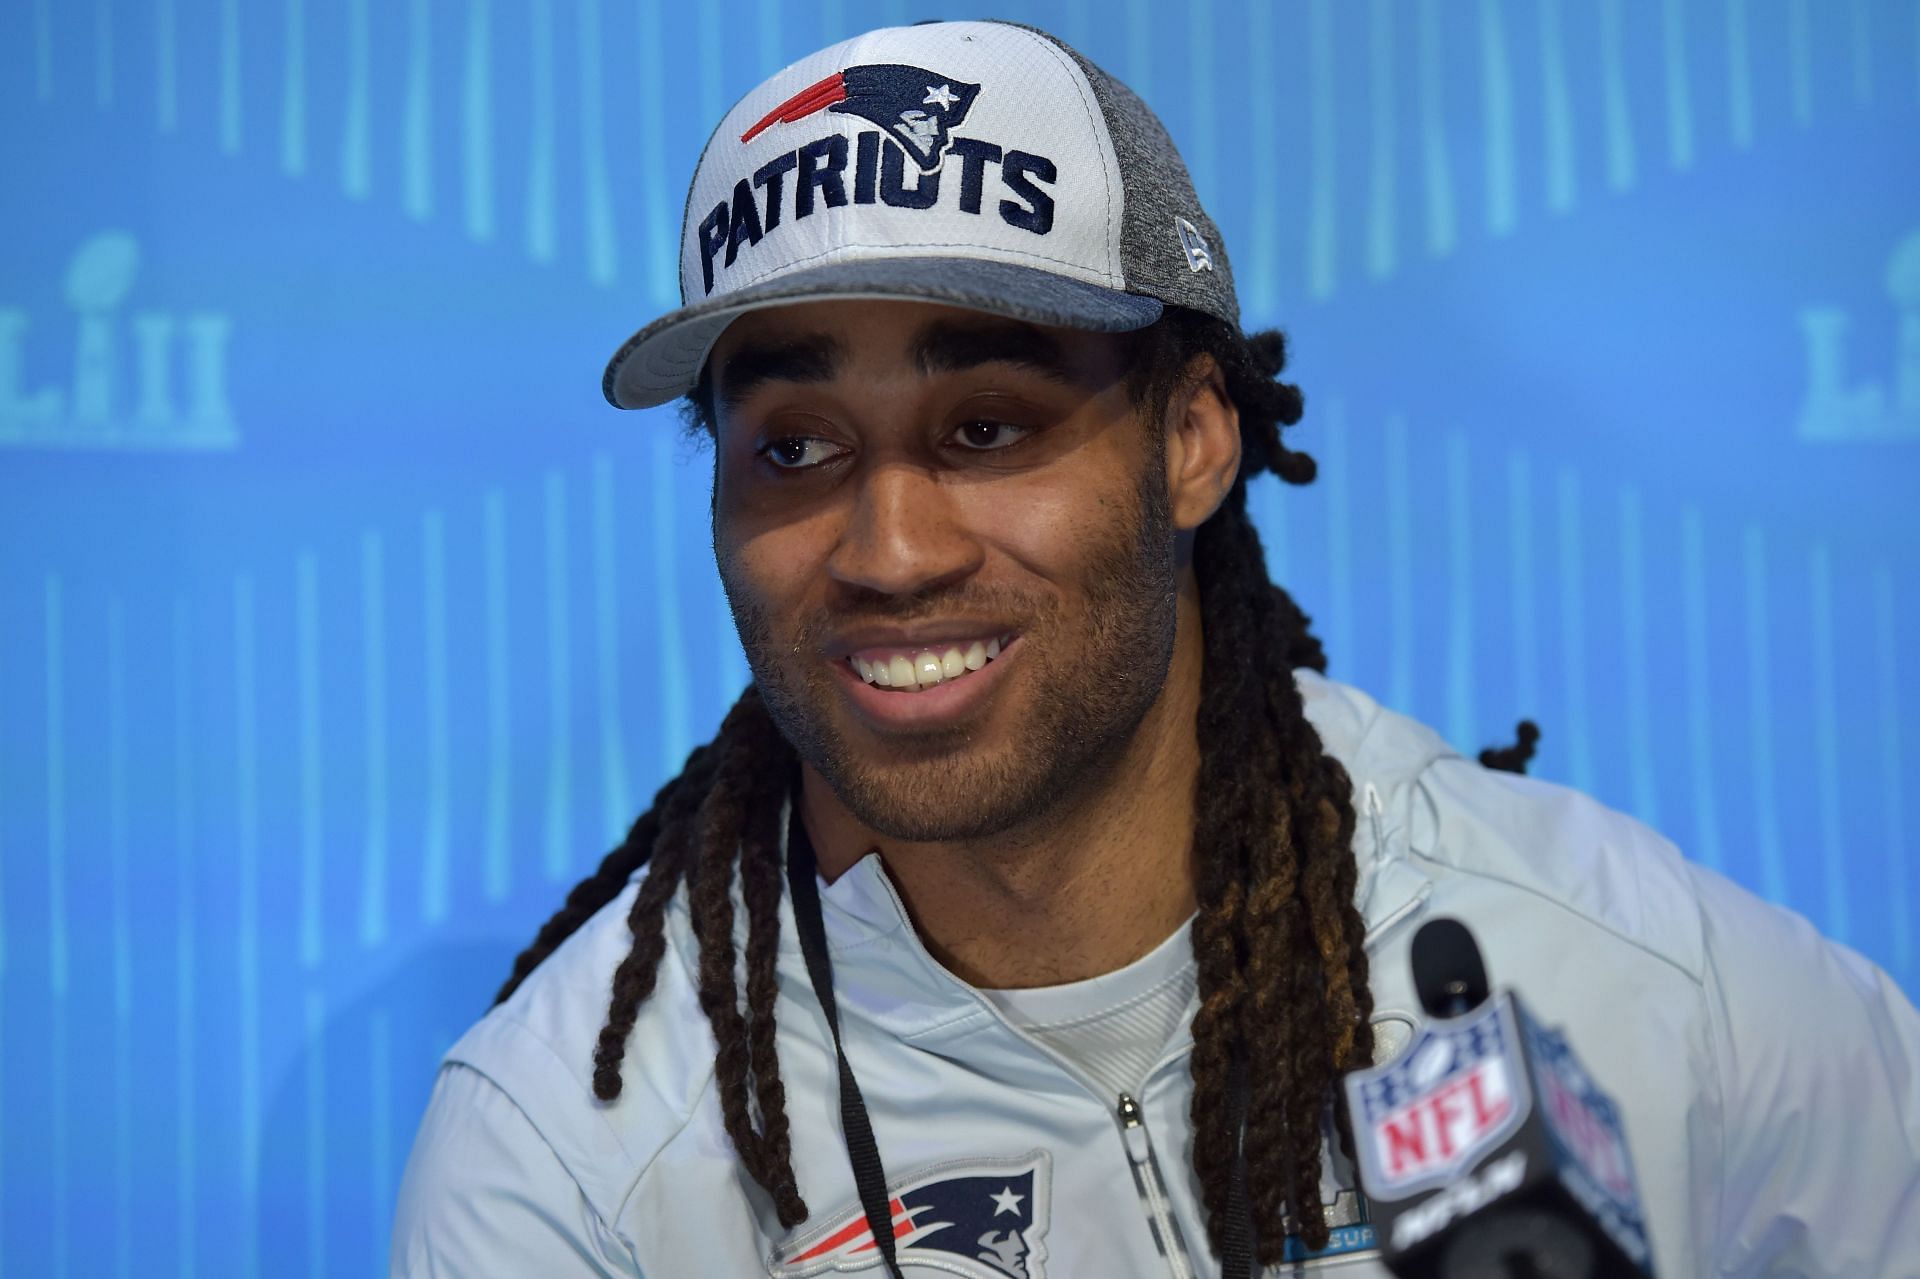 The newest member of the Indianapolis Colts, cornerback Stephon Gilmore